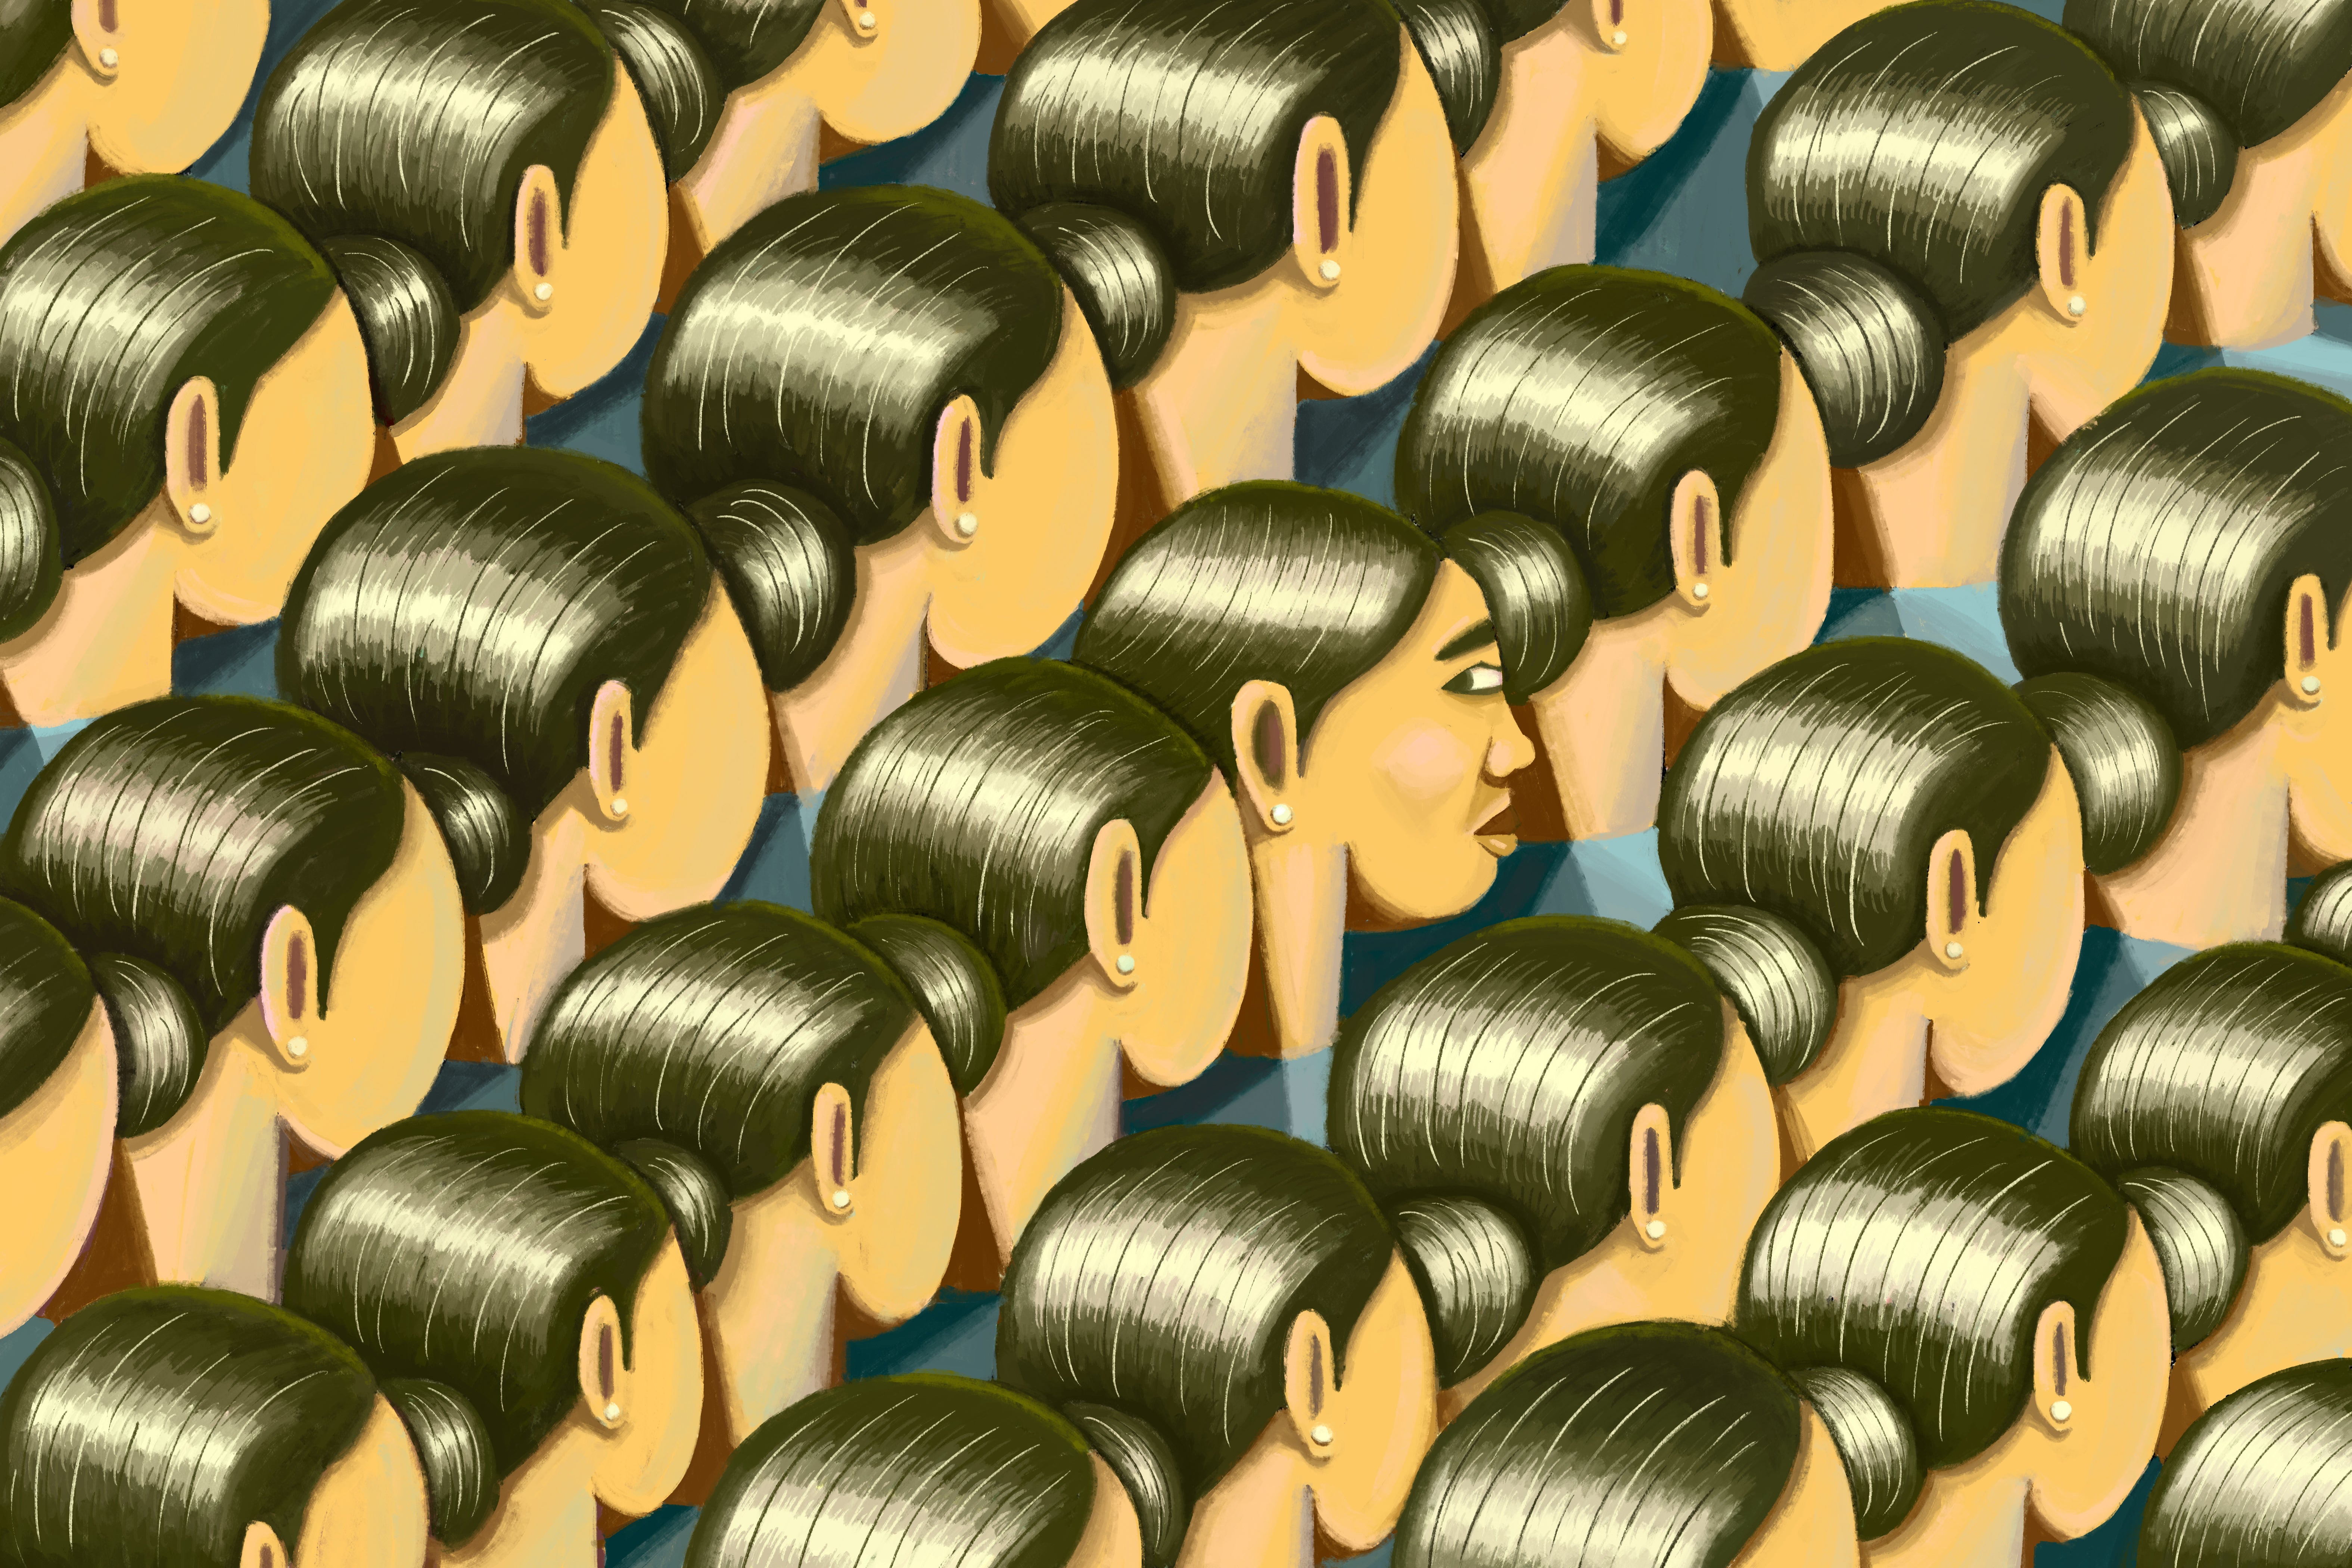 An illustration of the backs of identical women's heads, black hair in a tight bun, organized in repeating vertical rows. In the center, one head is turned to the right, showing the side of a face.